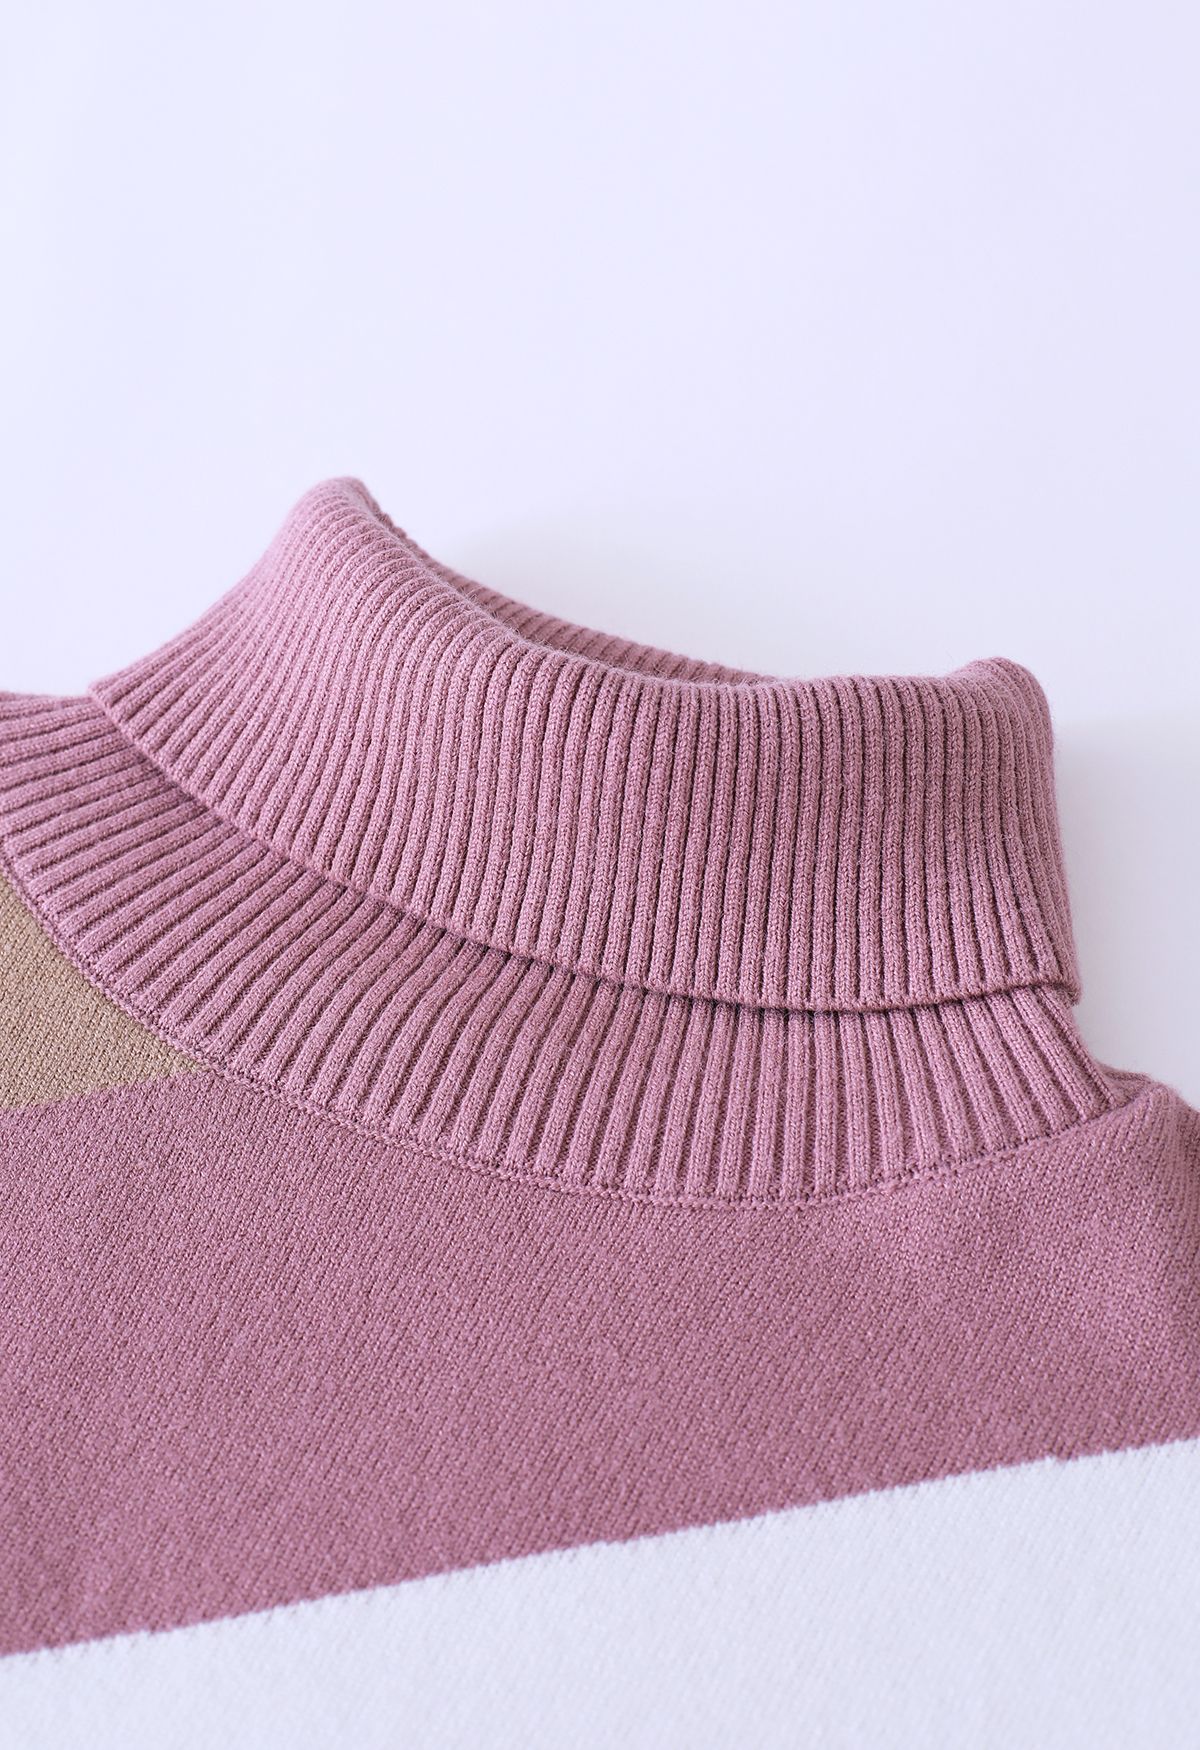 Striped Color Block Turtleneck Knit Sweater in Pink